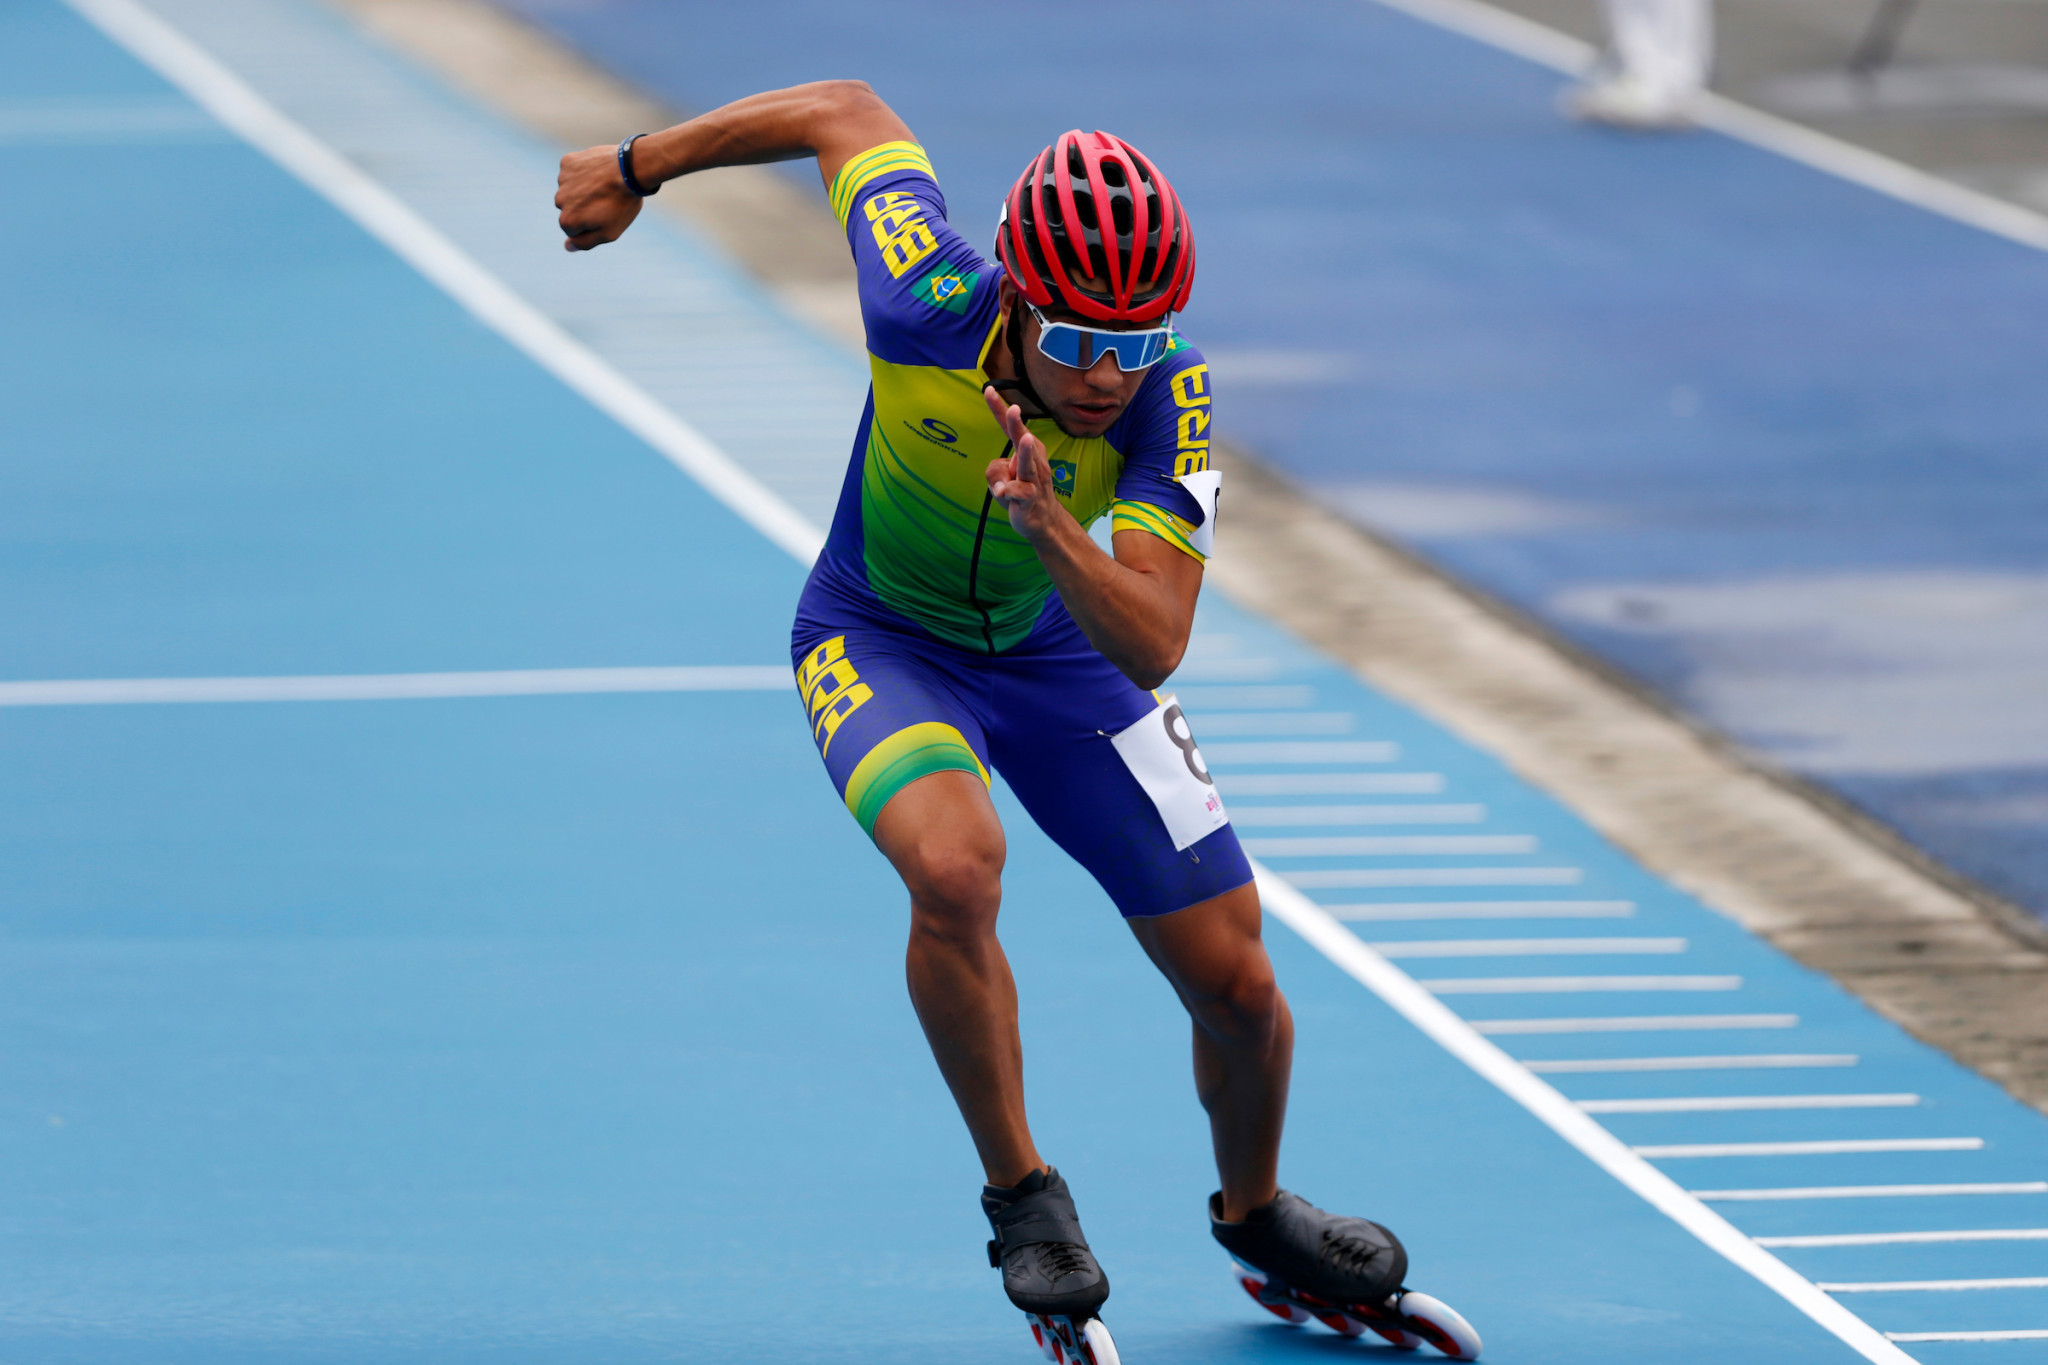 Guillherme Roche of Brazil was formidable in the men's 200 metres speed skating final to take gold ©Agencia.Xpress Media